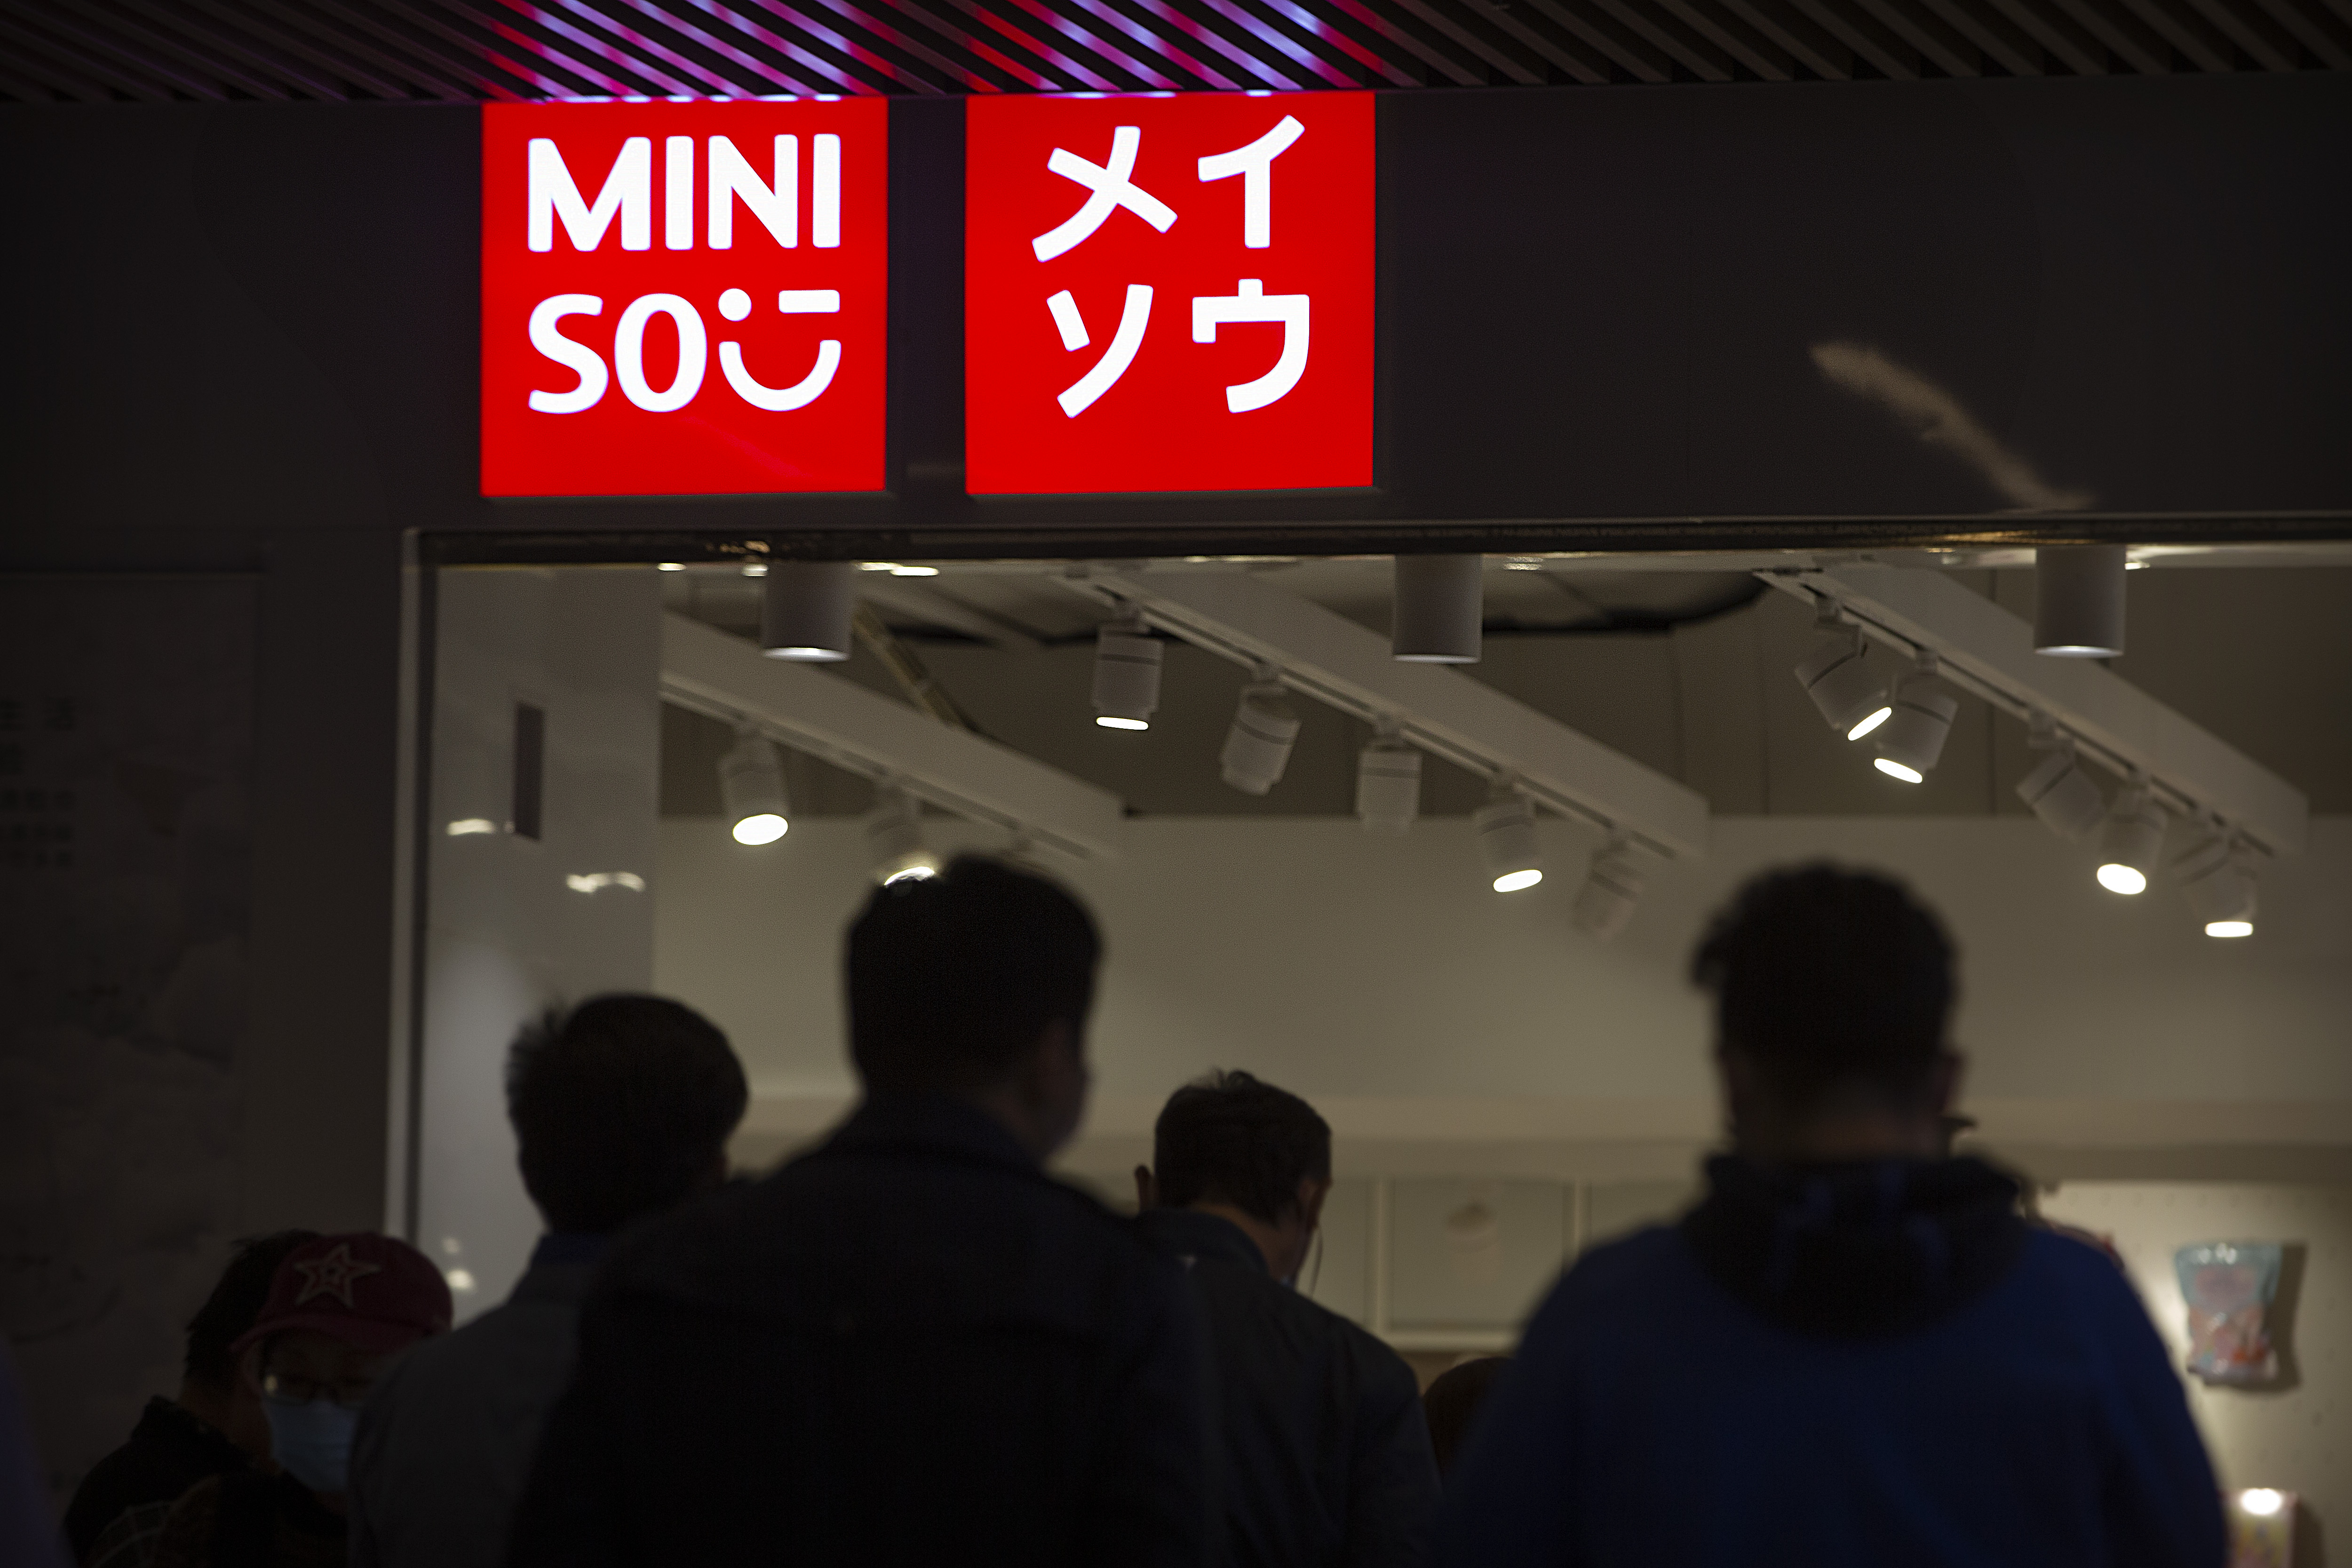 Miniso, the Japanese-looking variety store from China, sees shares